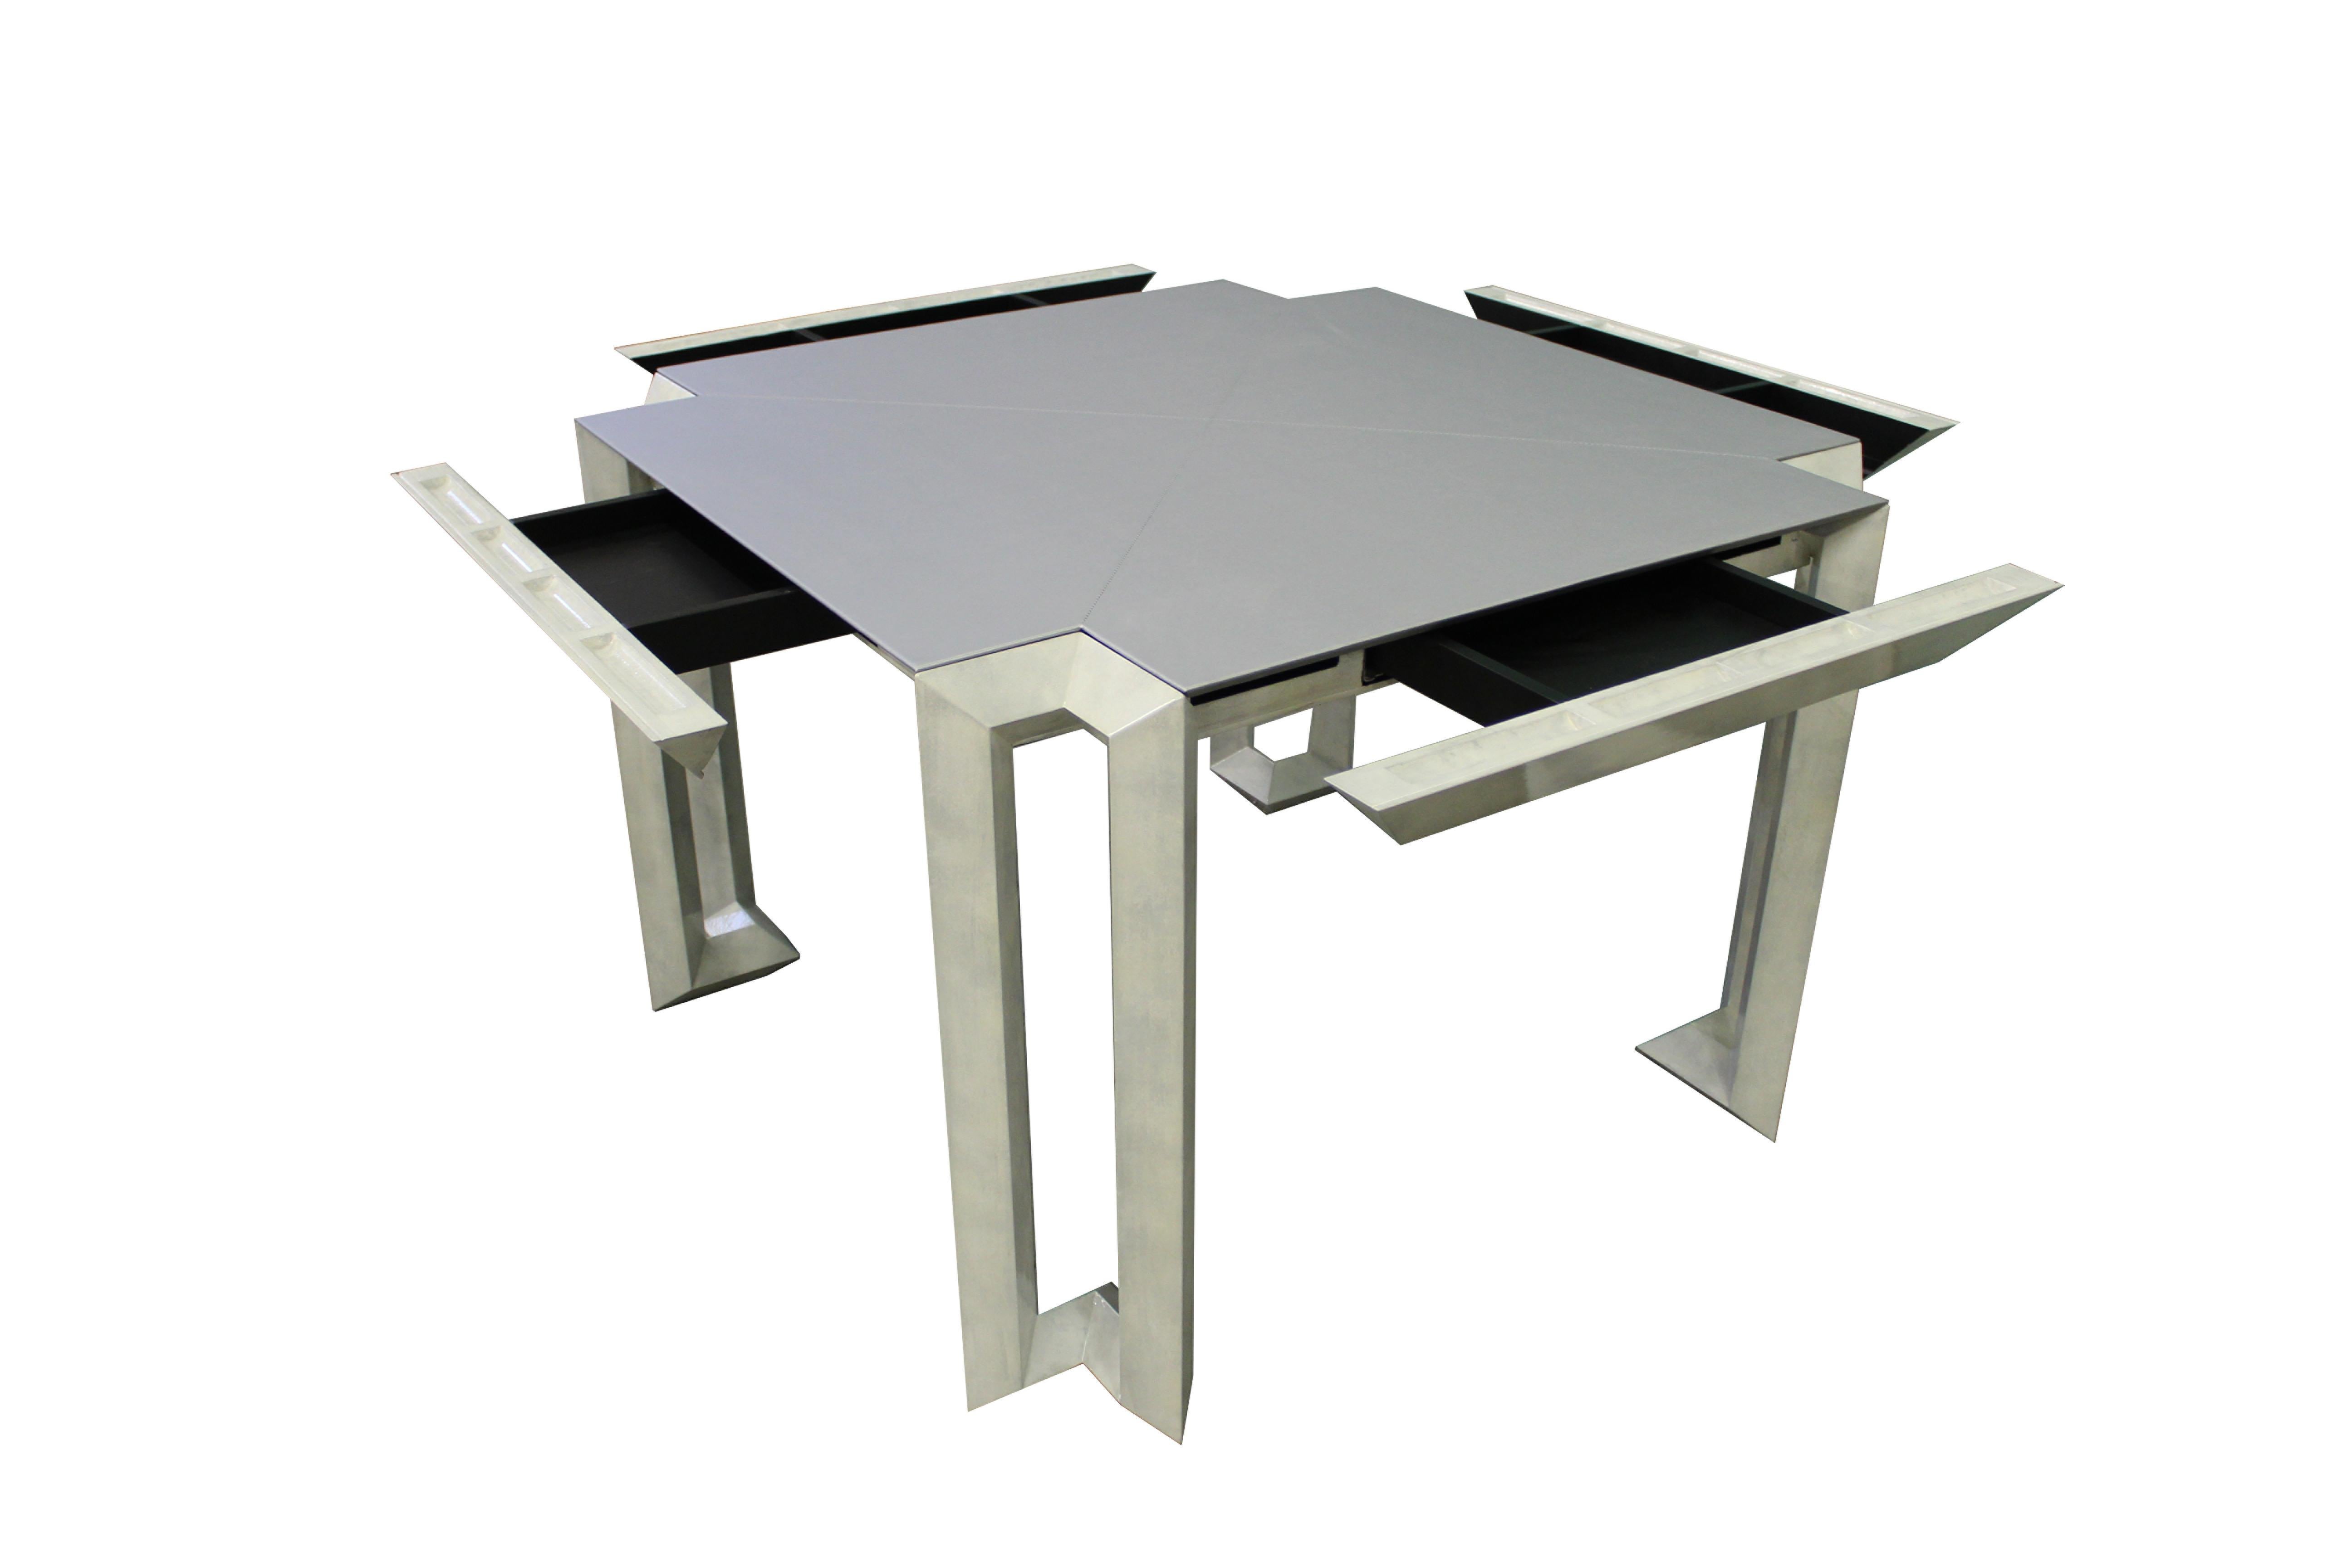 This square-shaped table is not only a surface for your favorite tabletop games but also a practical storage solution with drawers on all four sides. The top of the table is elegantly covered in a soft and durable fabric, providing a smooth and